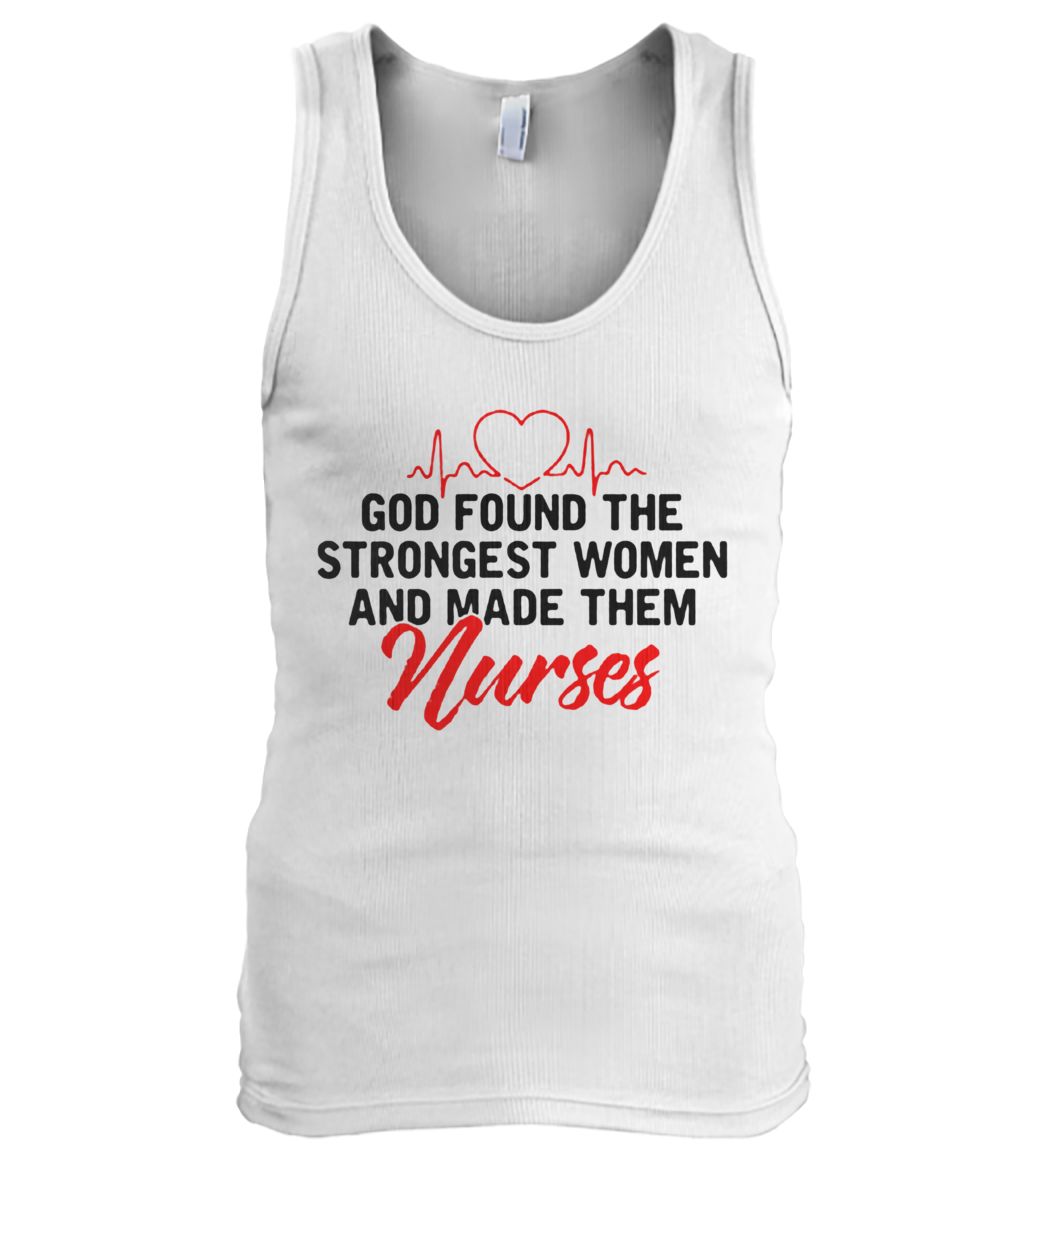 God found the strongest women and made them nurses men's tank top